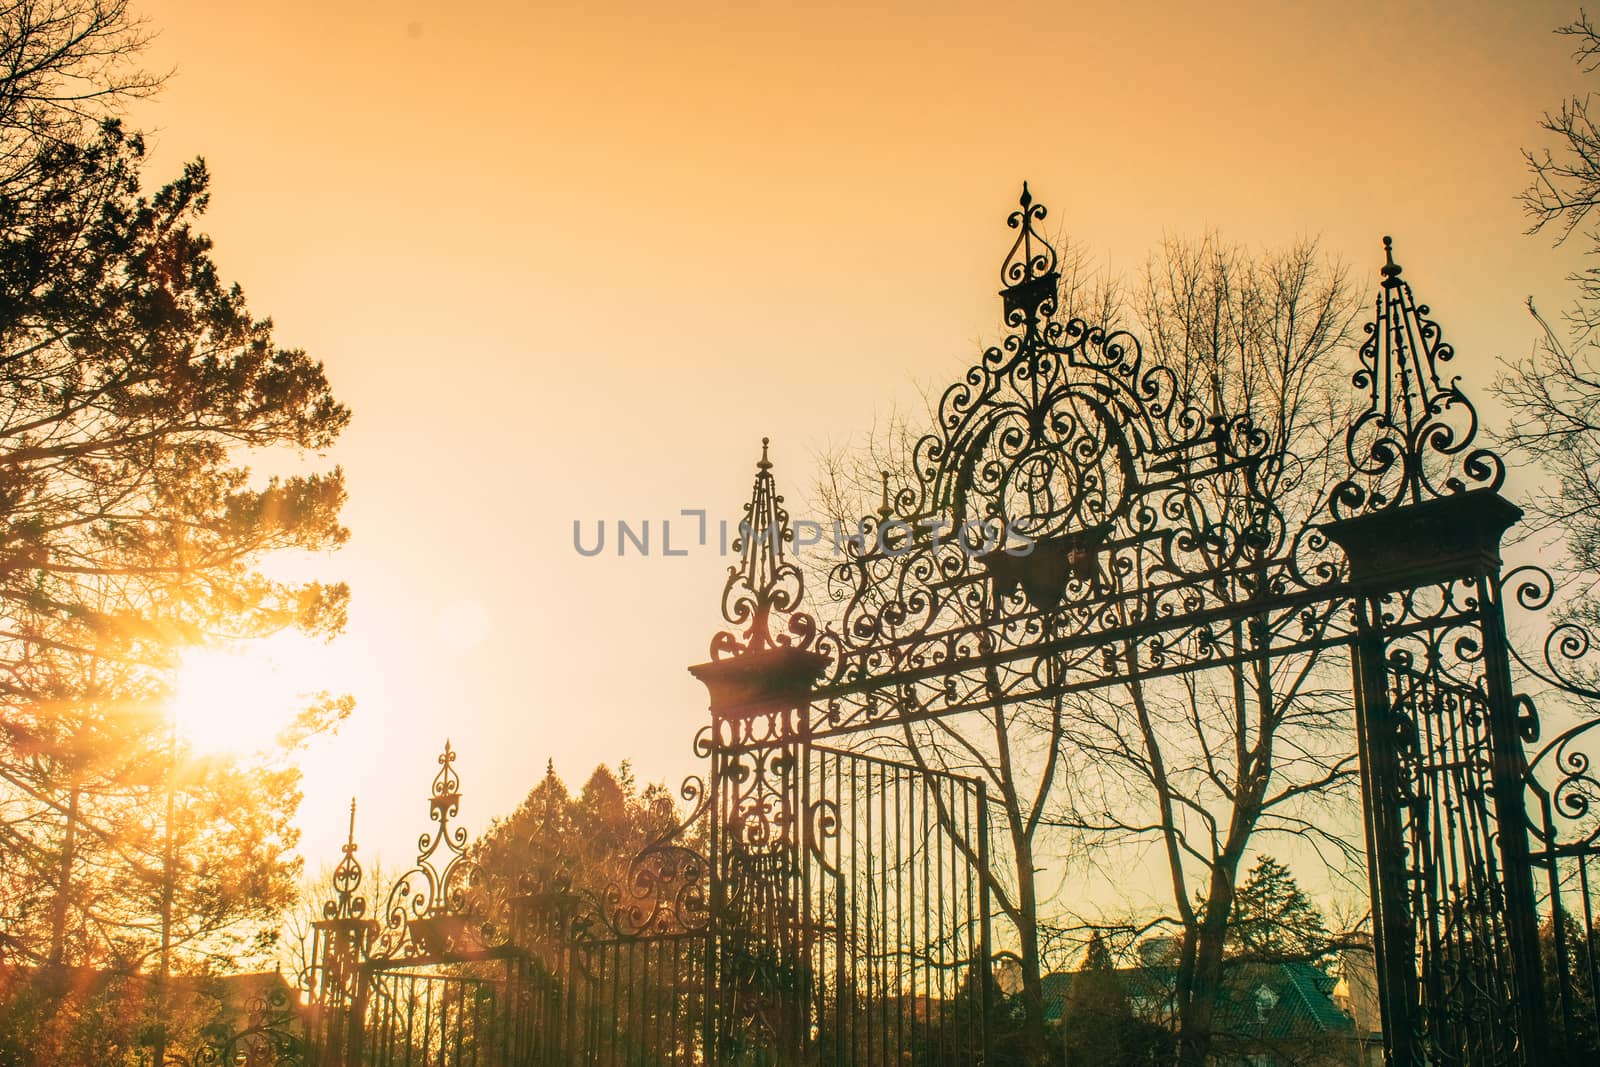 A Bright Yellow Sunset Behind an Ornamental Metal Gate by bju12290